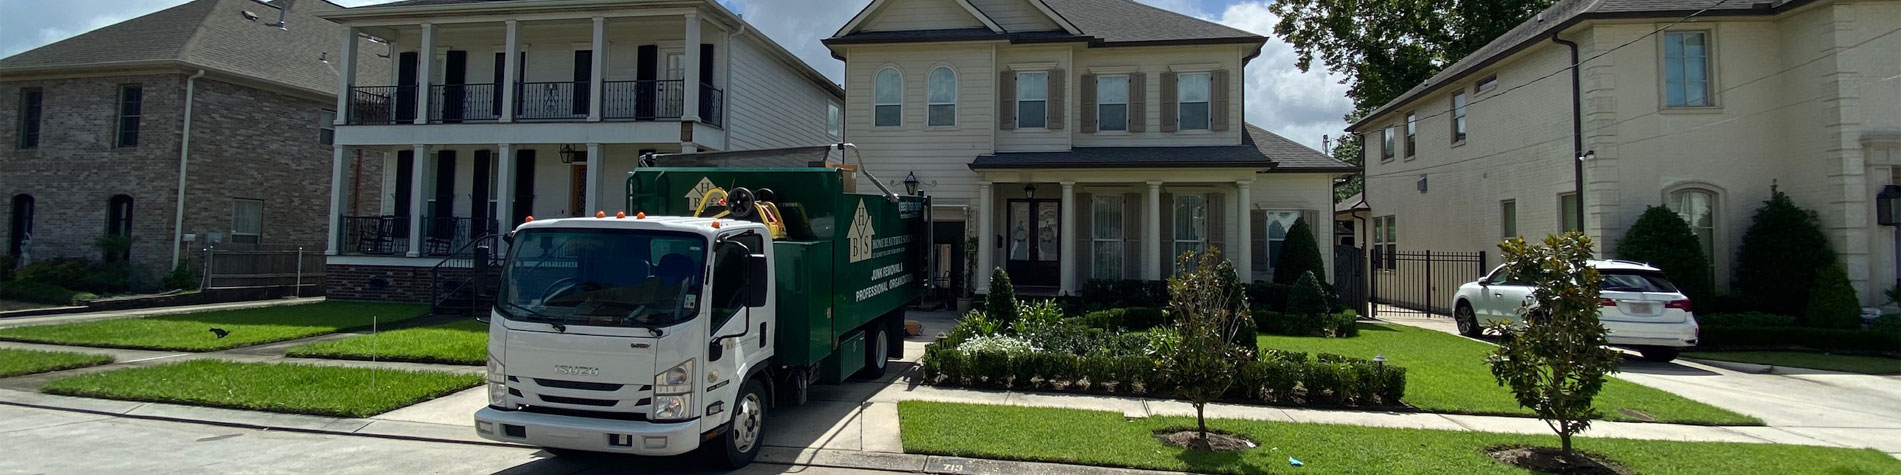 Junk Removal Truck in a Ponchatoula Neighborhood Completing Junk Removal Work